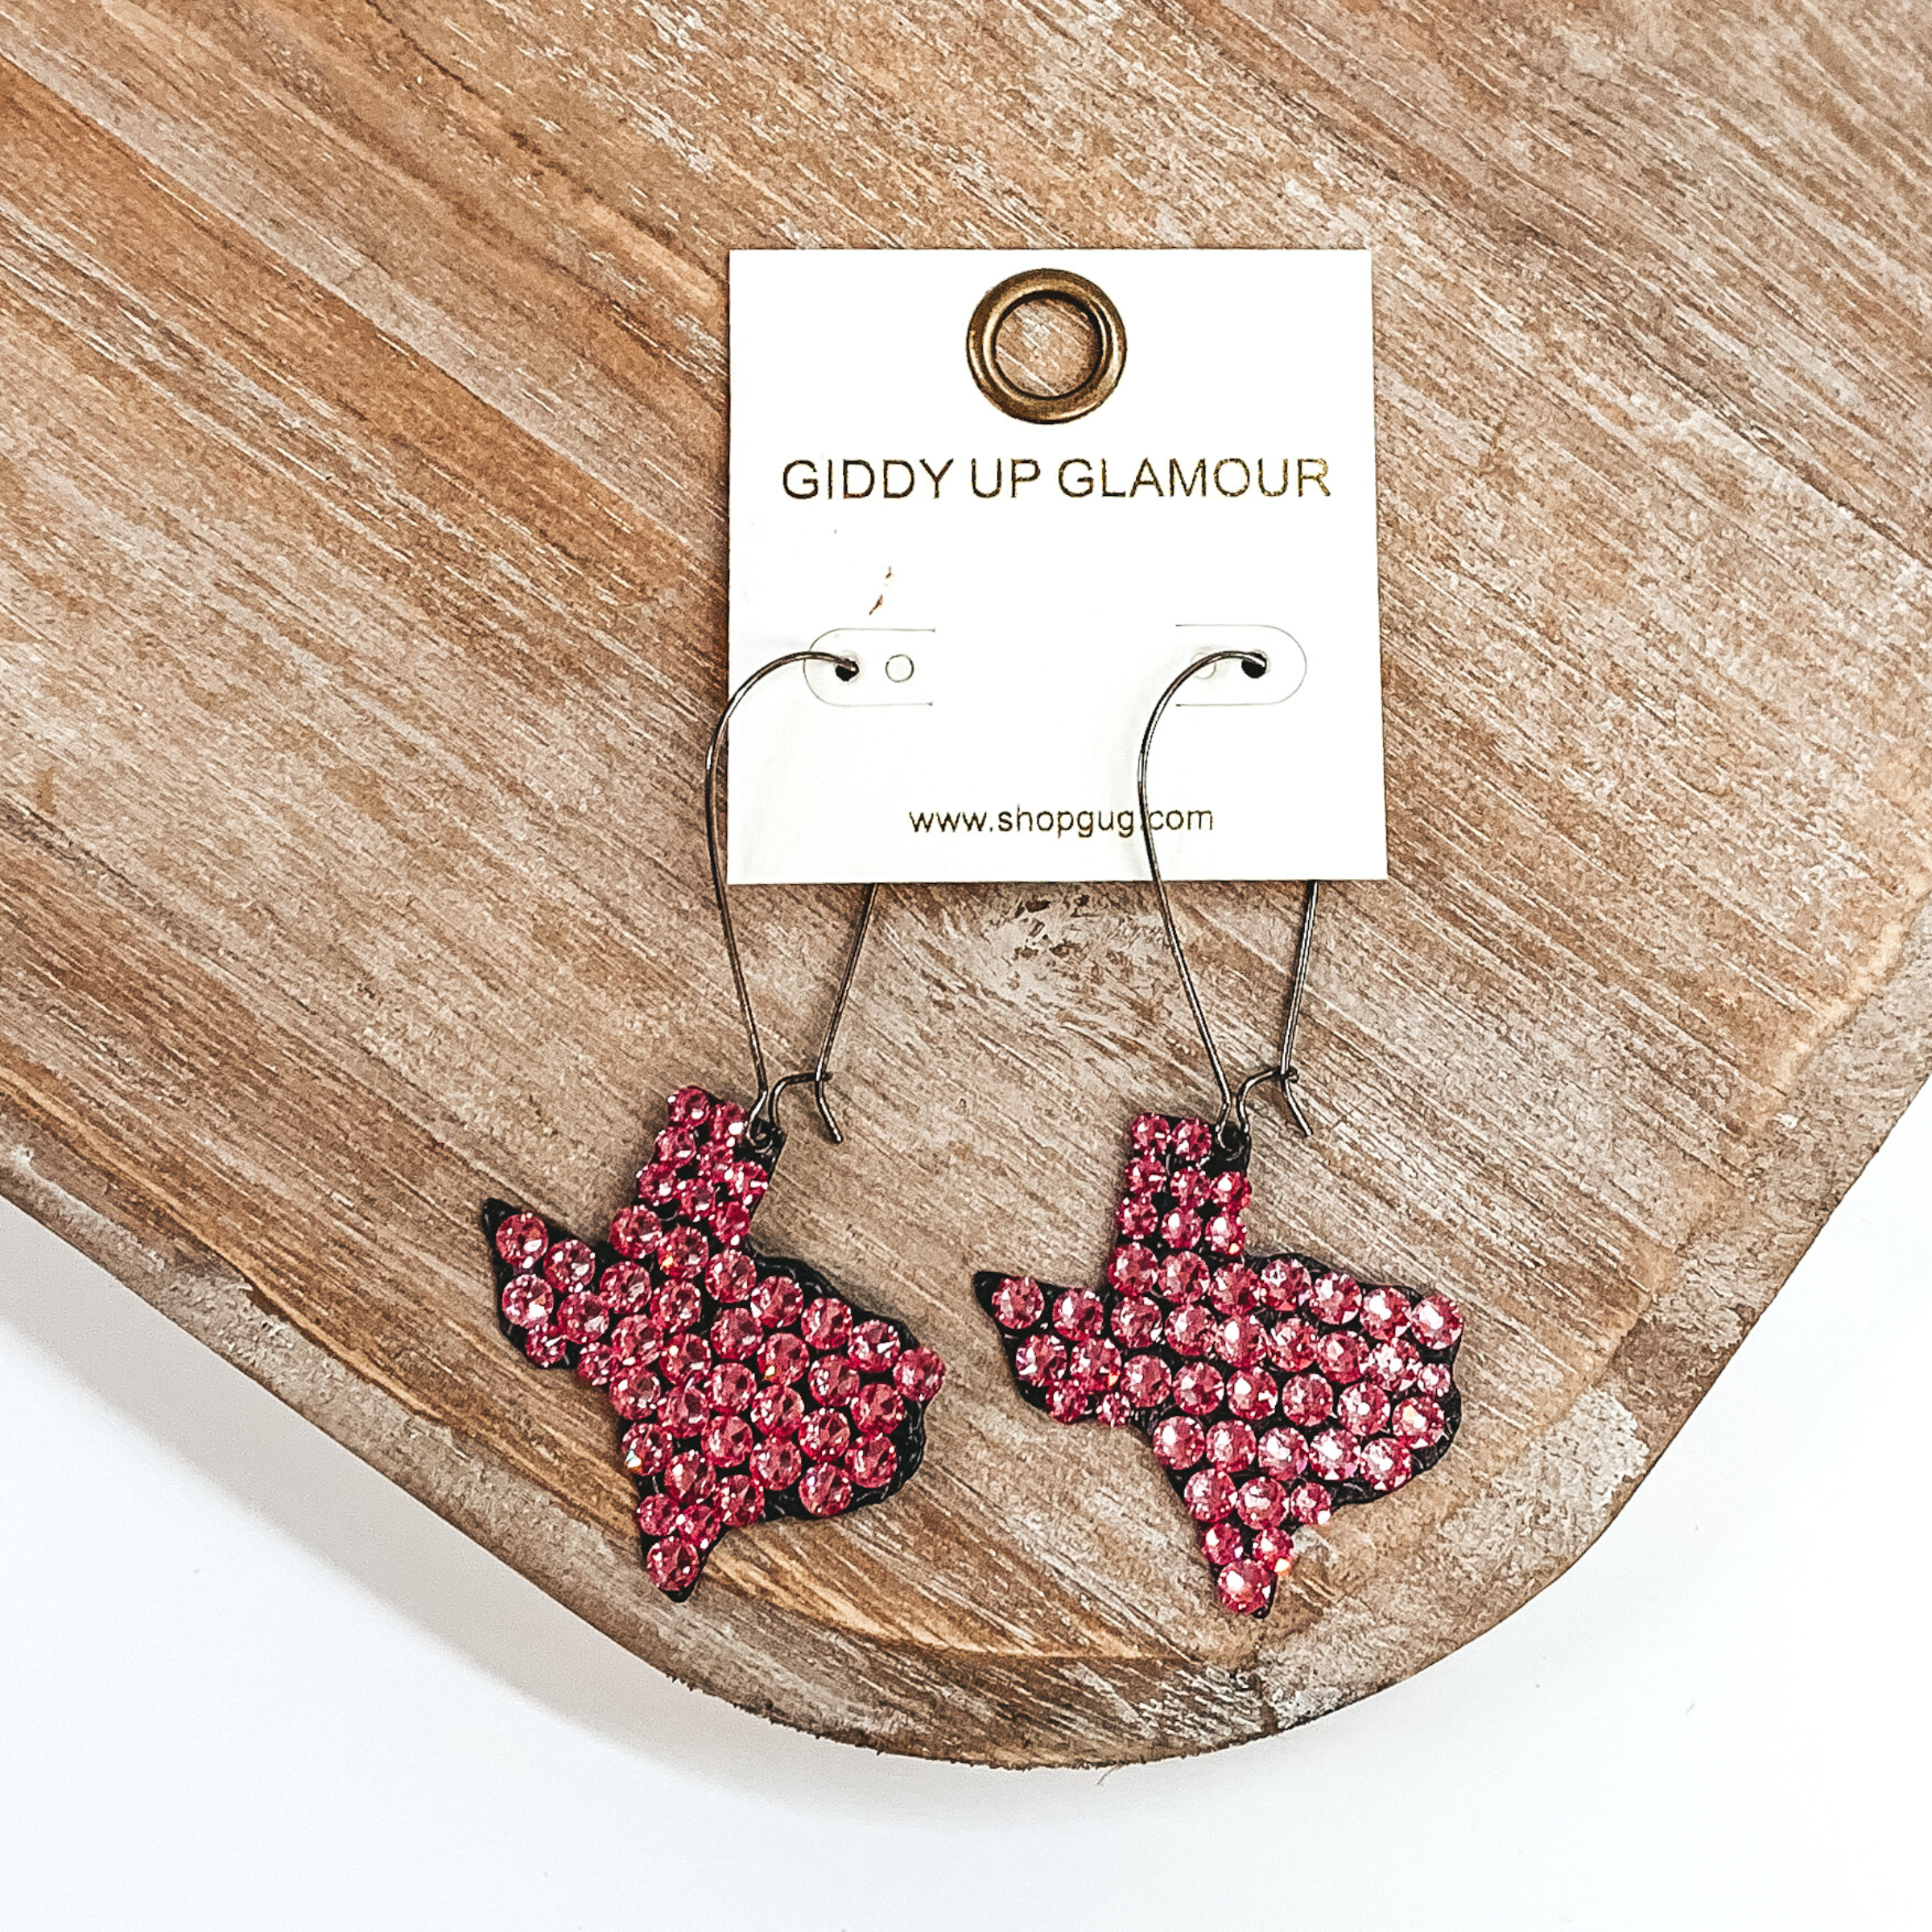 Black thin wire earringd with a texas shaped pendant. the pendant is covered in pink crystals. These earrings are pictured on a tan wood colored prop on a white background. 